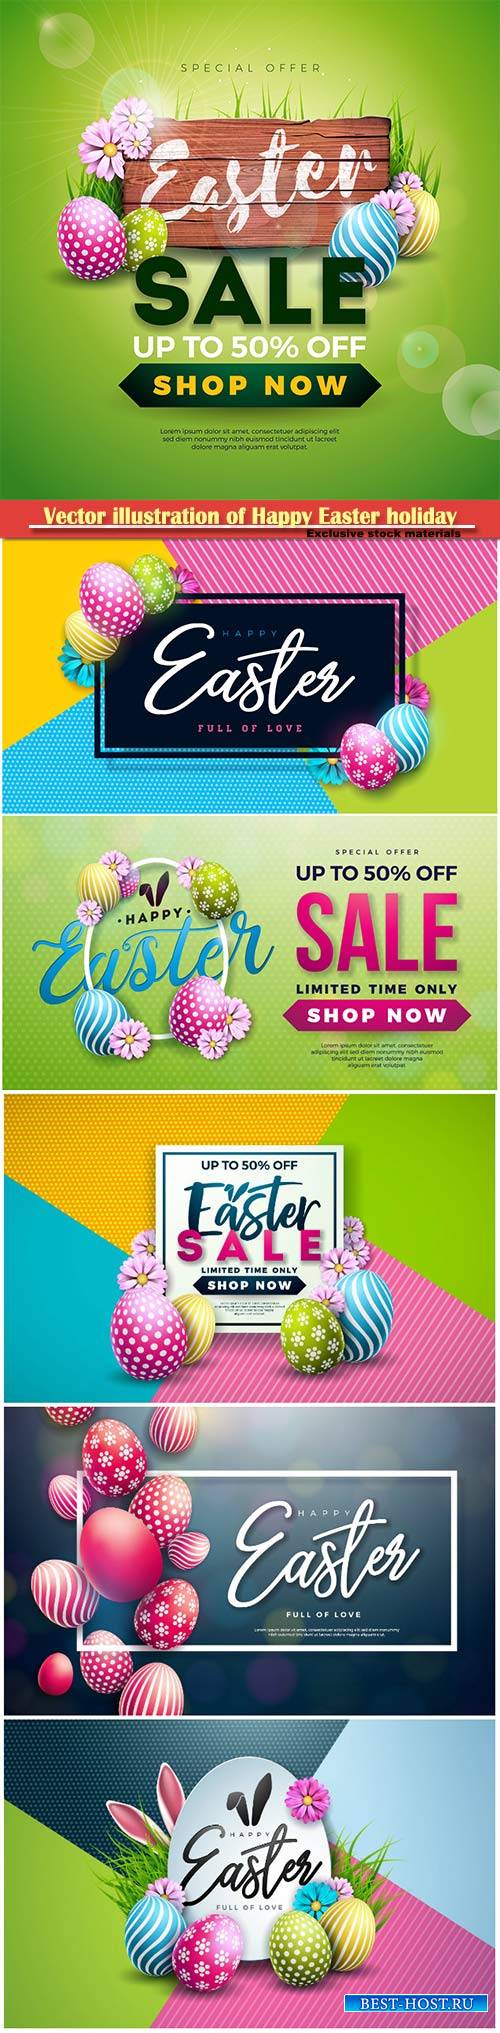 Vector illustration of Happy Easter holiday with egg and spring flower